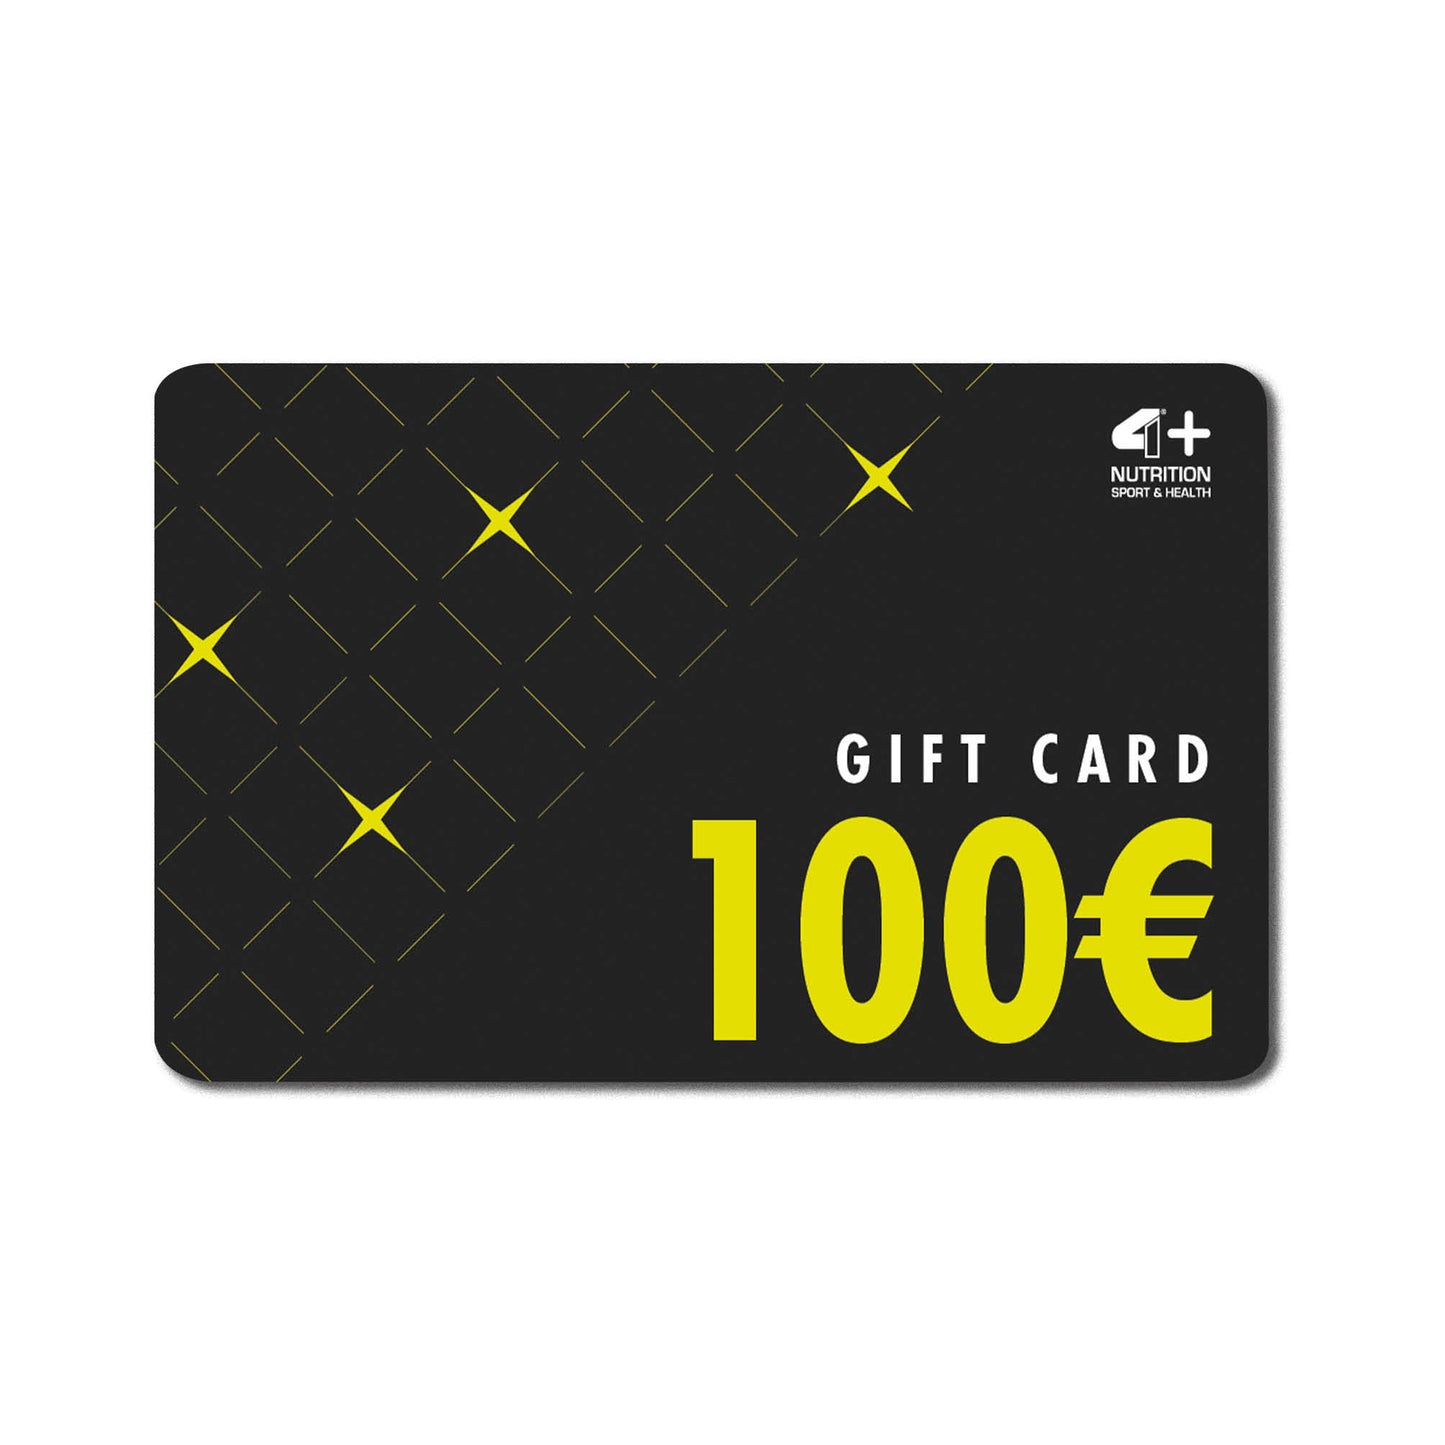 4+ Nutrition Gift Card